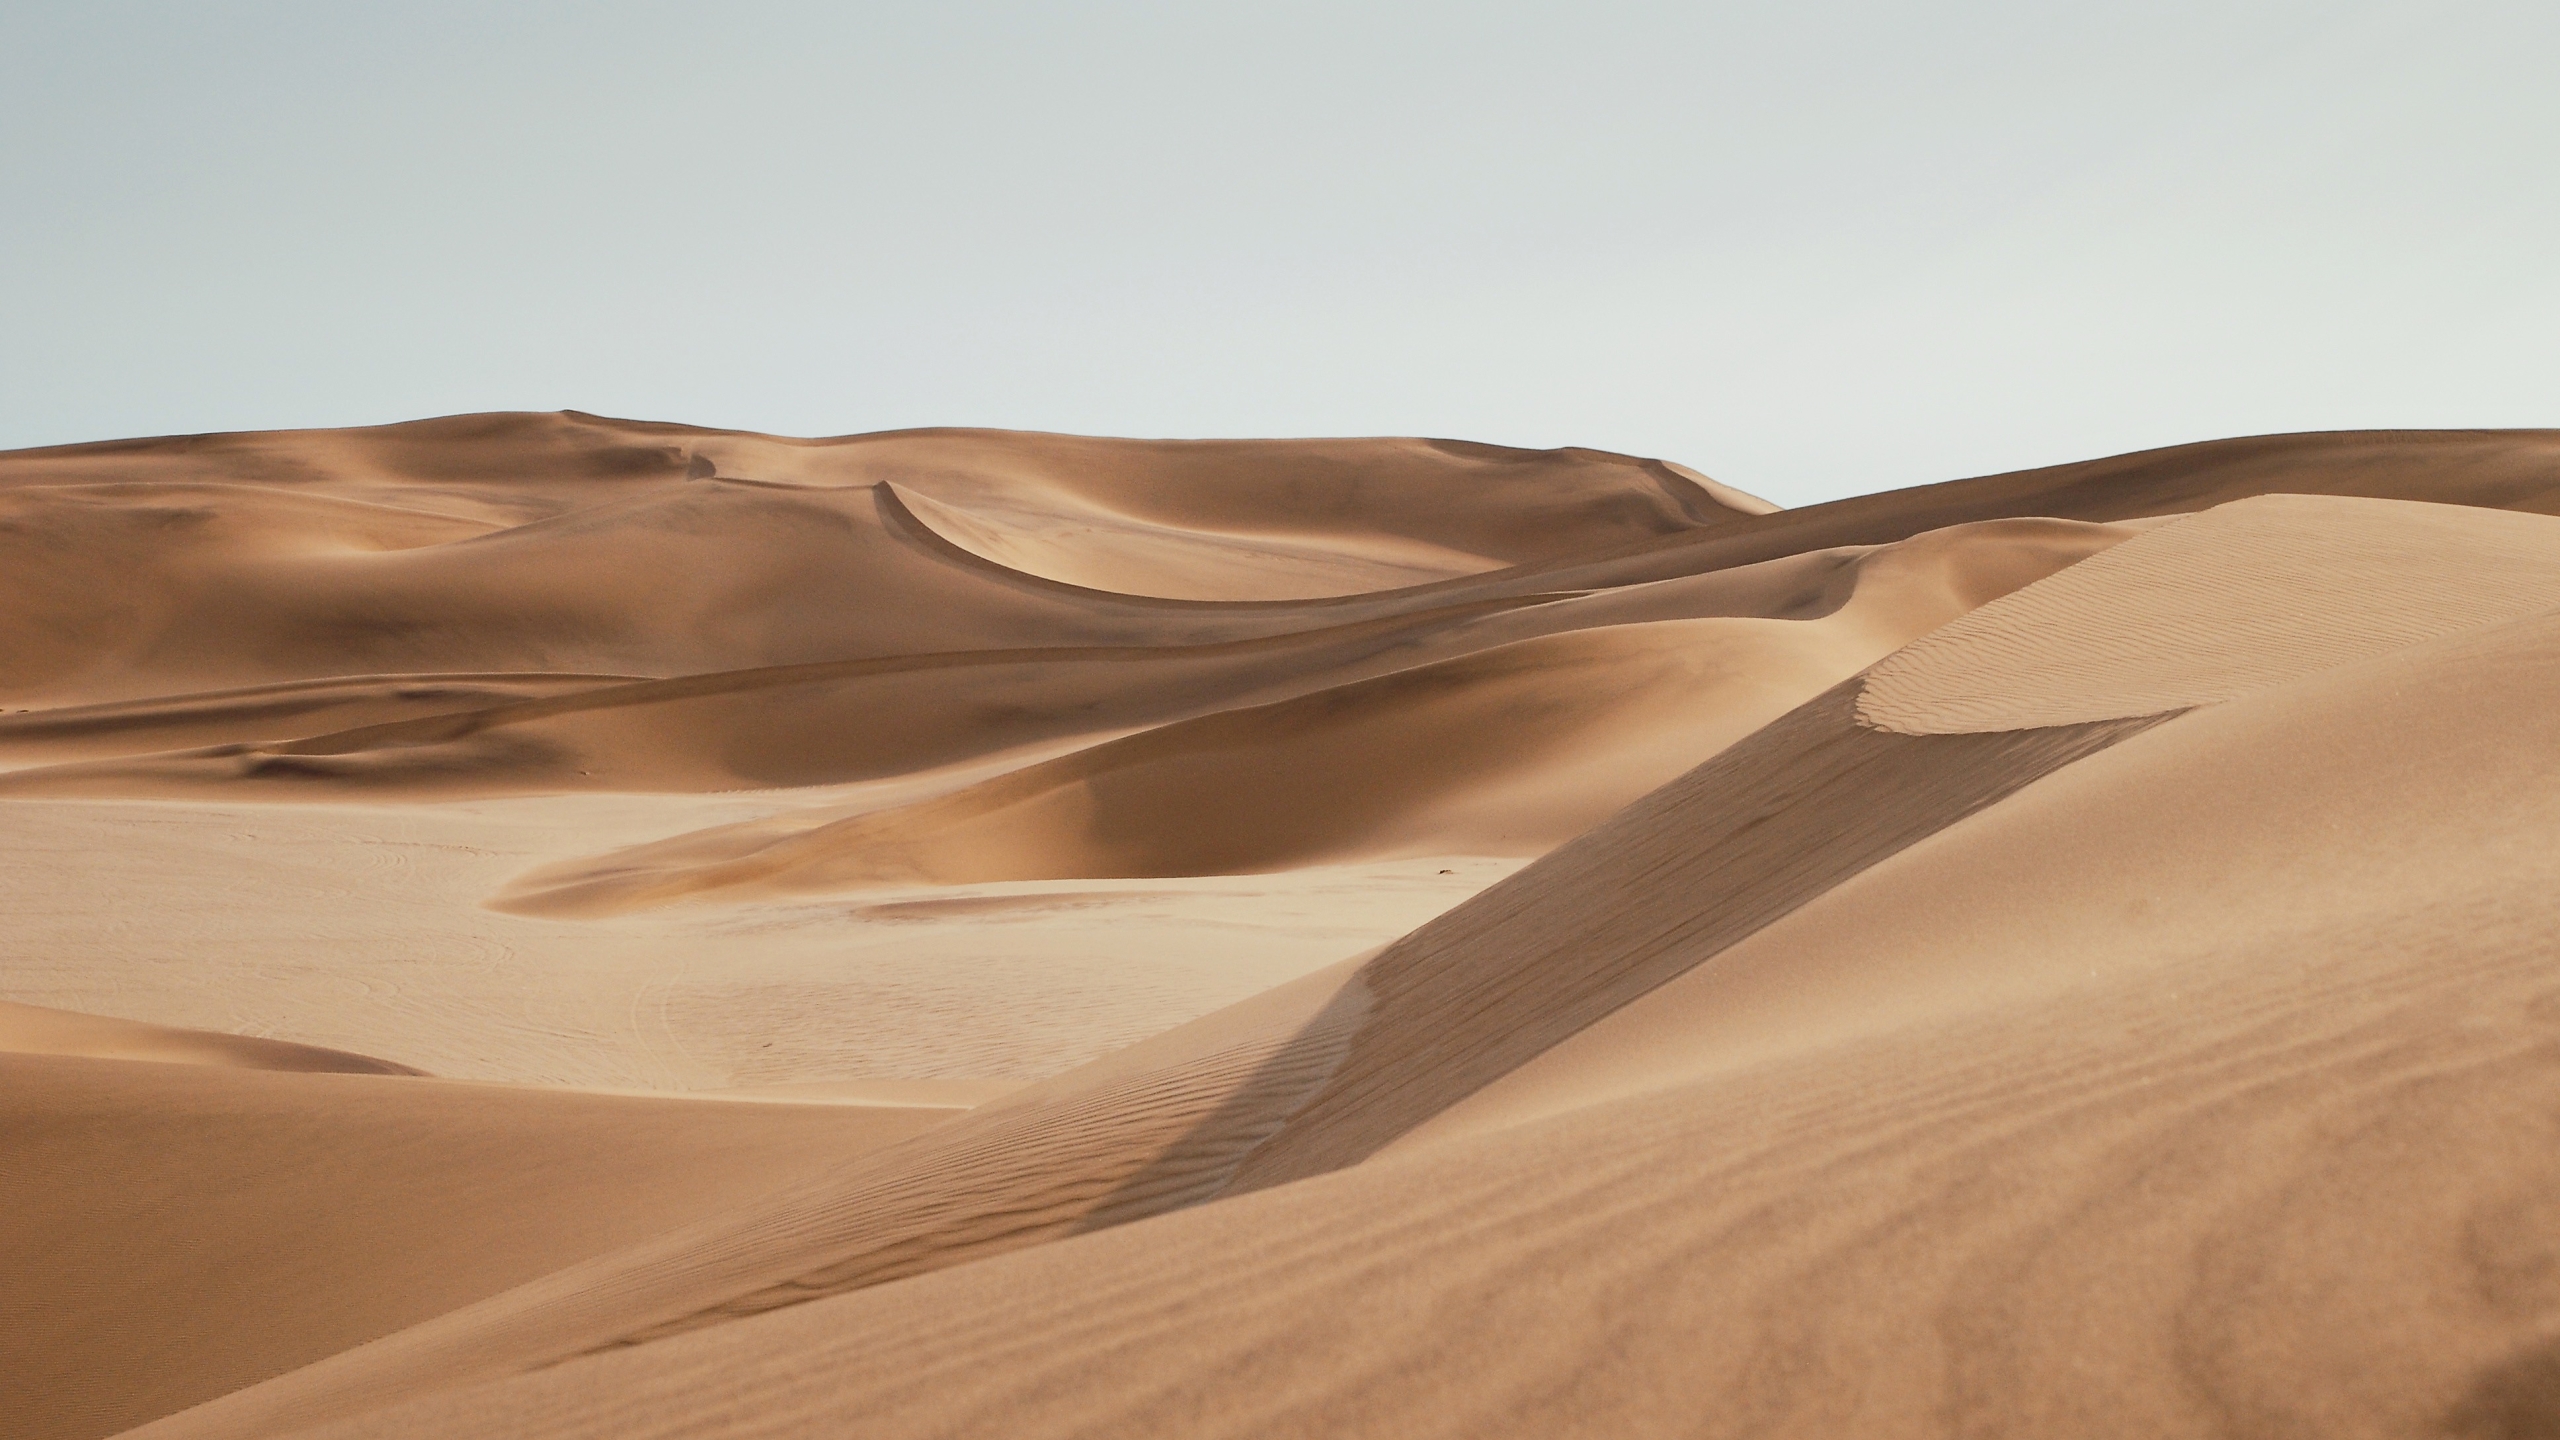 2560x1440 Desert Sand Emptiness 1440p Resolution Wallpaper Hd Nature 4k Wallpapers Images Photos And Background